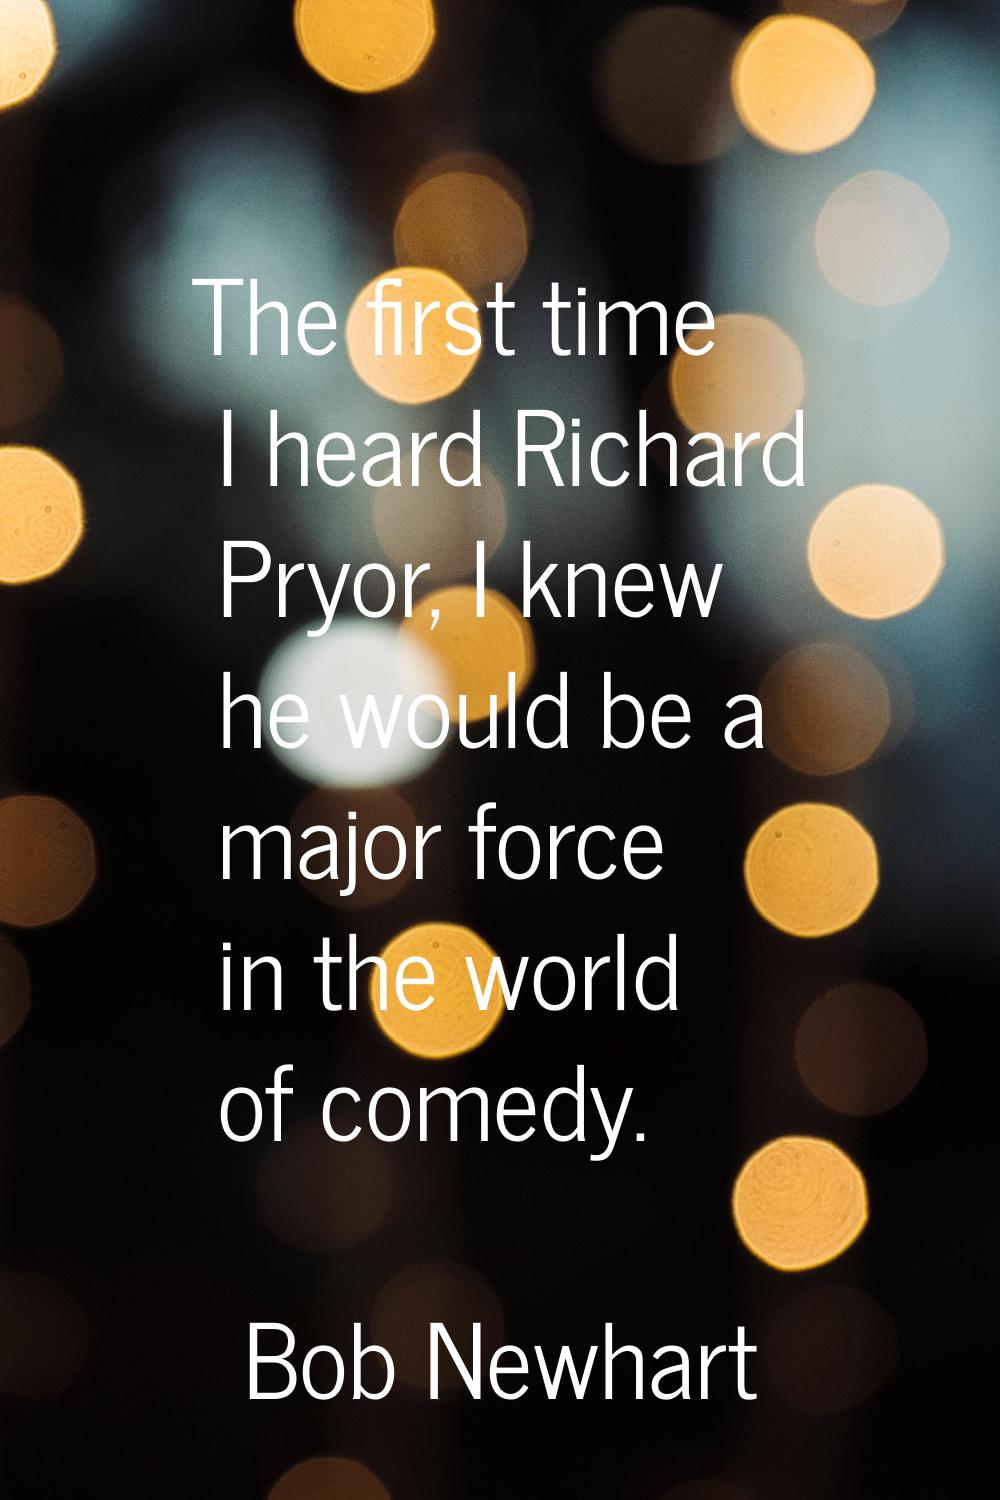 The first time I heard Richard Pryor, I knew he would be a major force in the world of comedy.